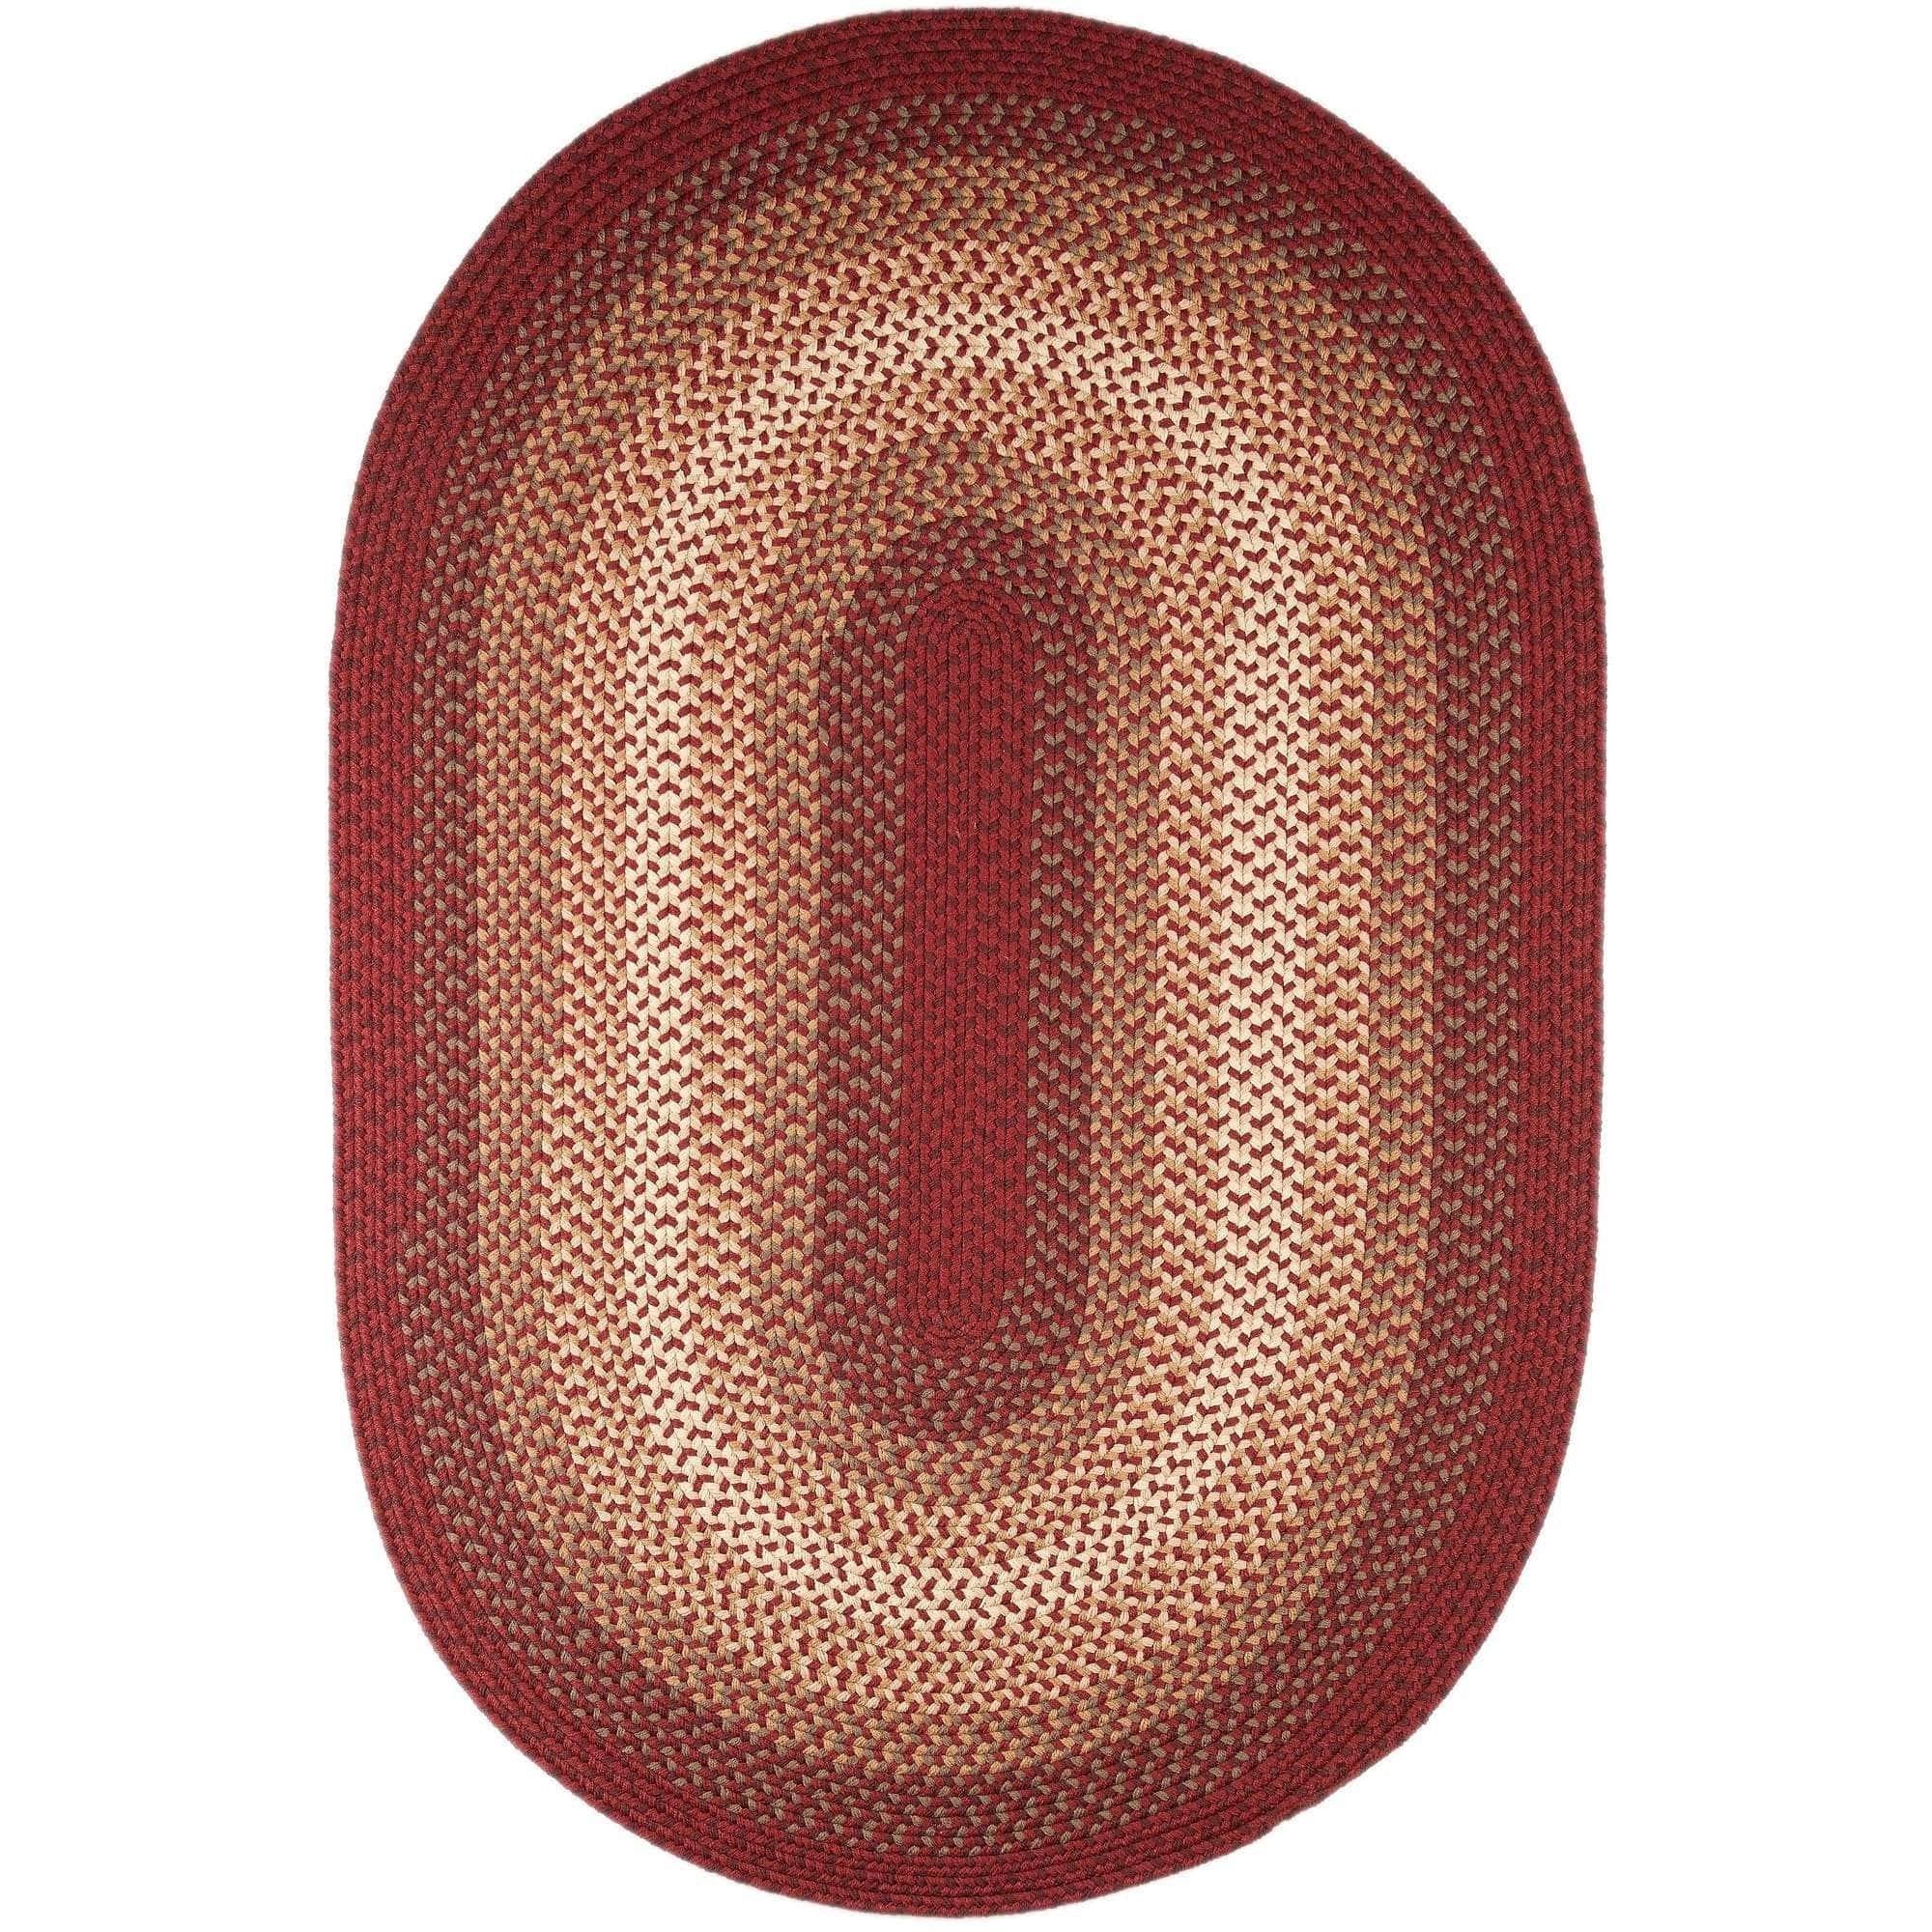 Pinecrest Rustic Bordered Braided Rug #color_red